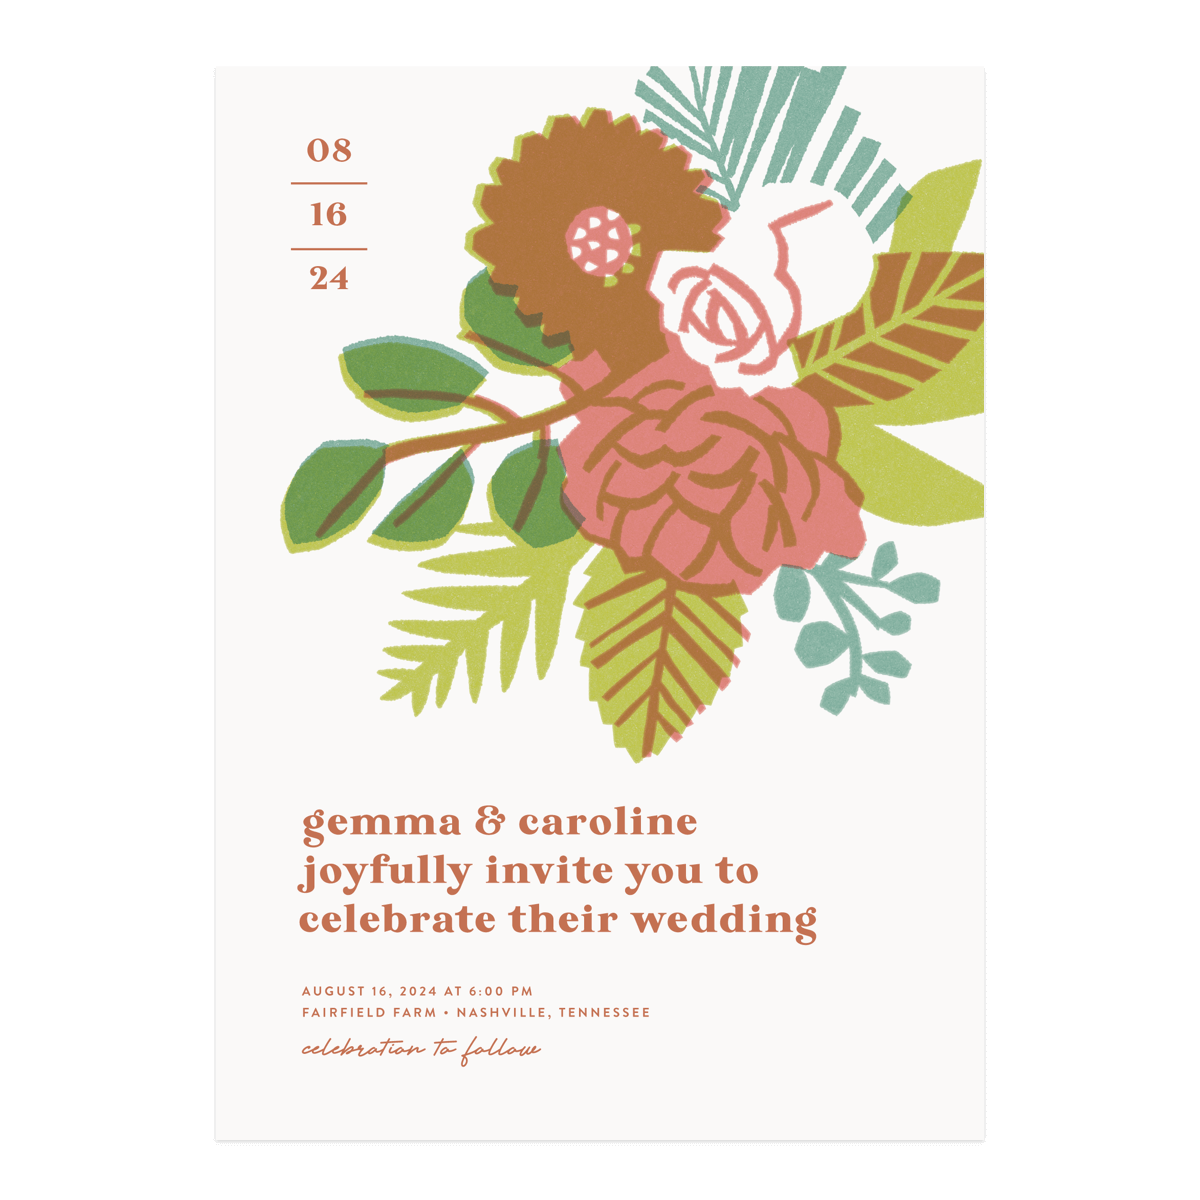 A Wedding Invitation from the Retro Floral Collection